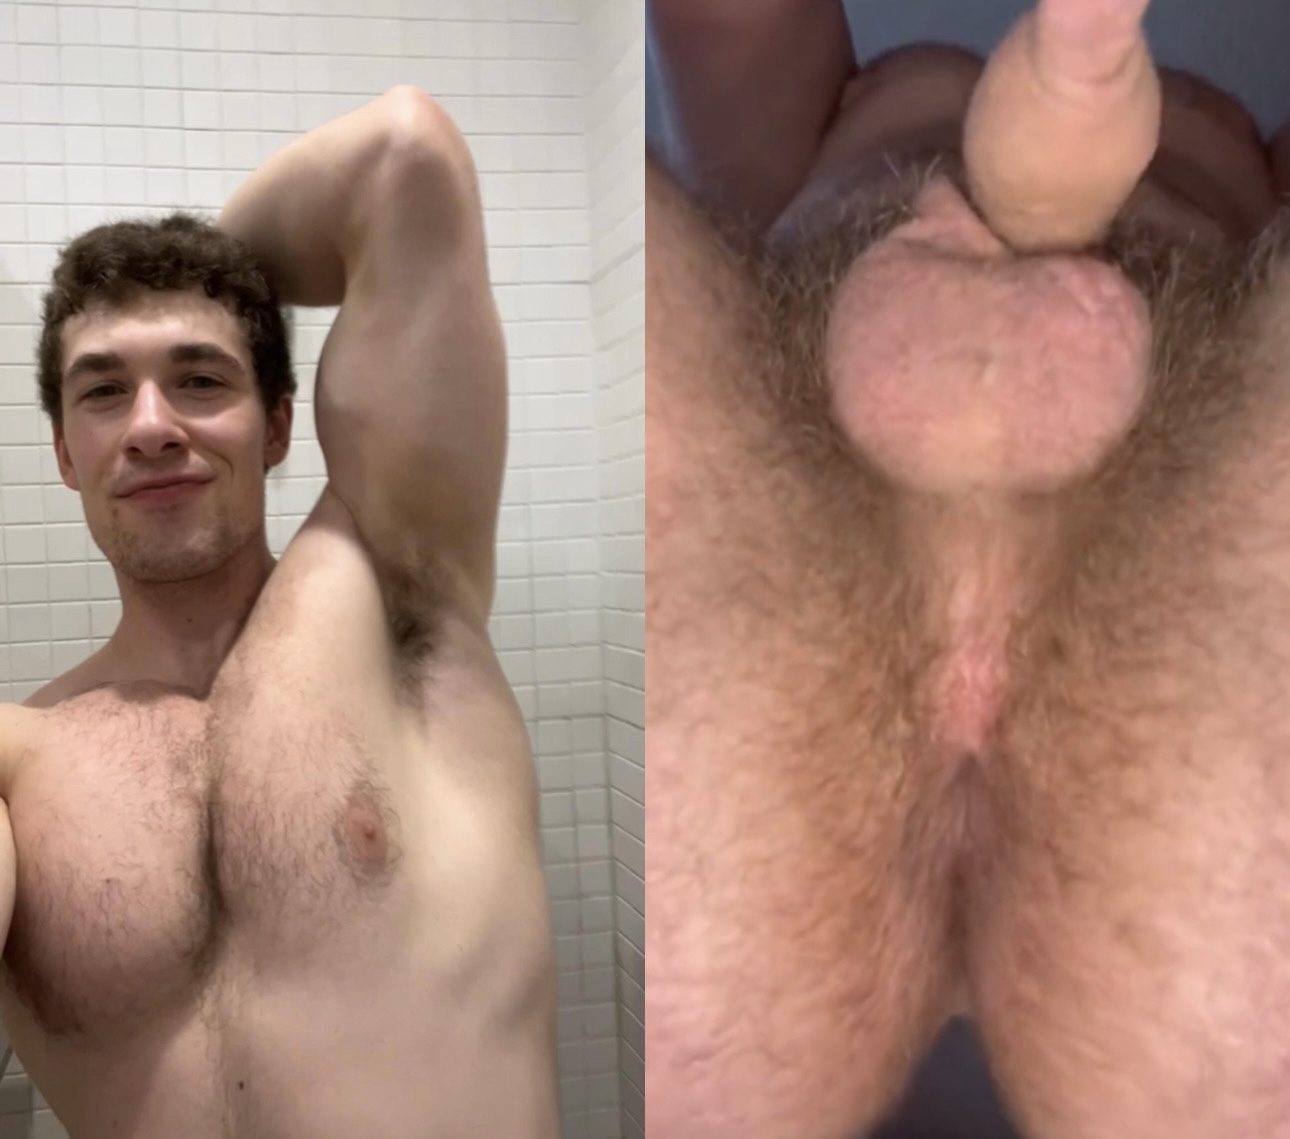 POV: Canadian college bro sits on your face